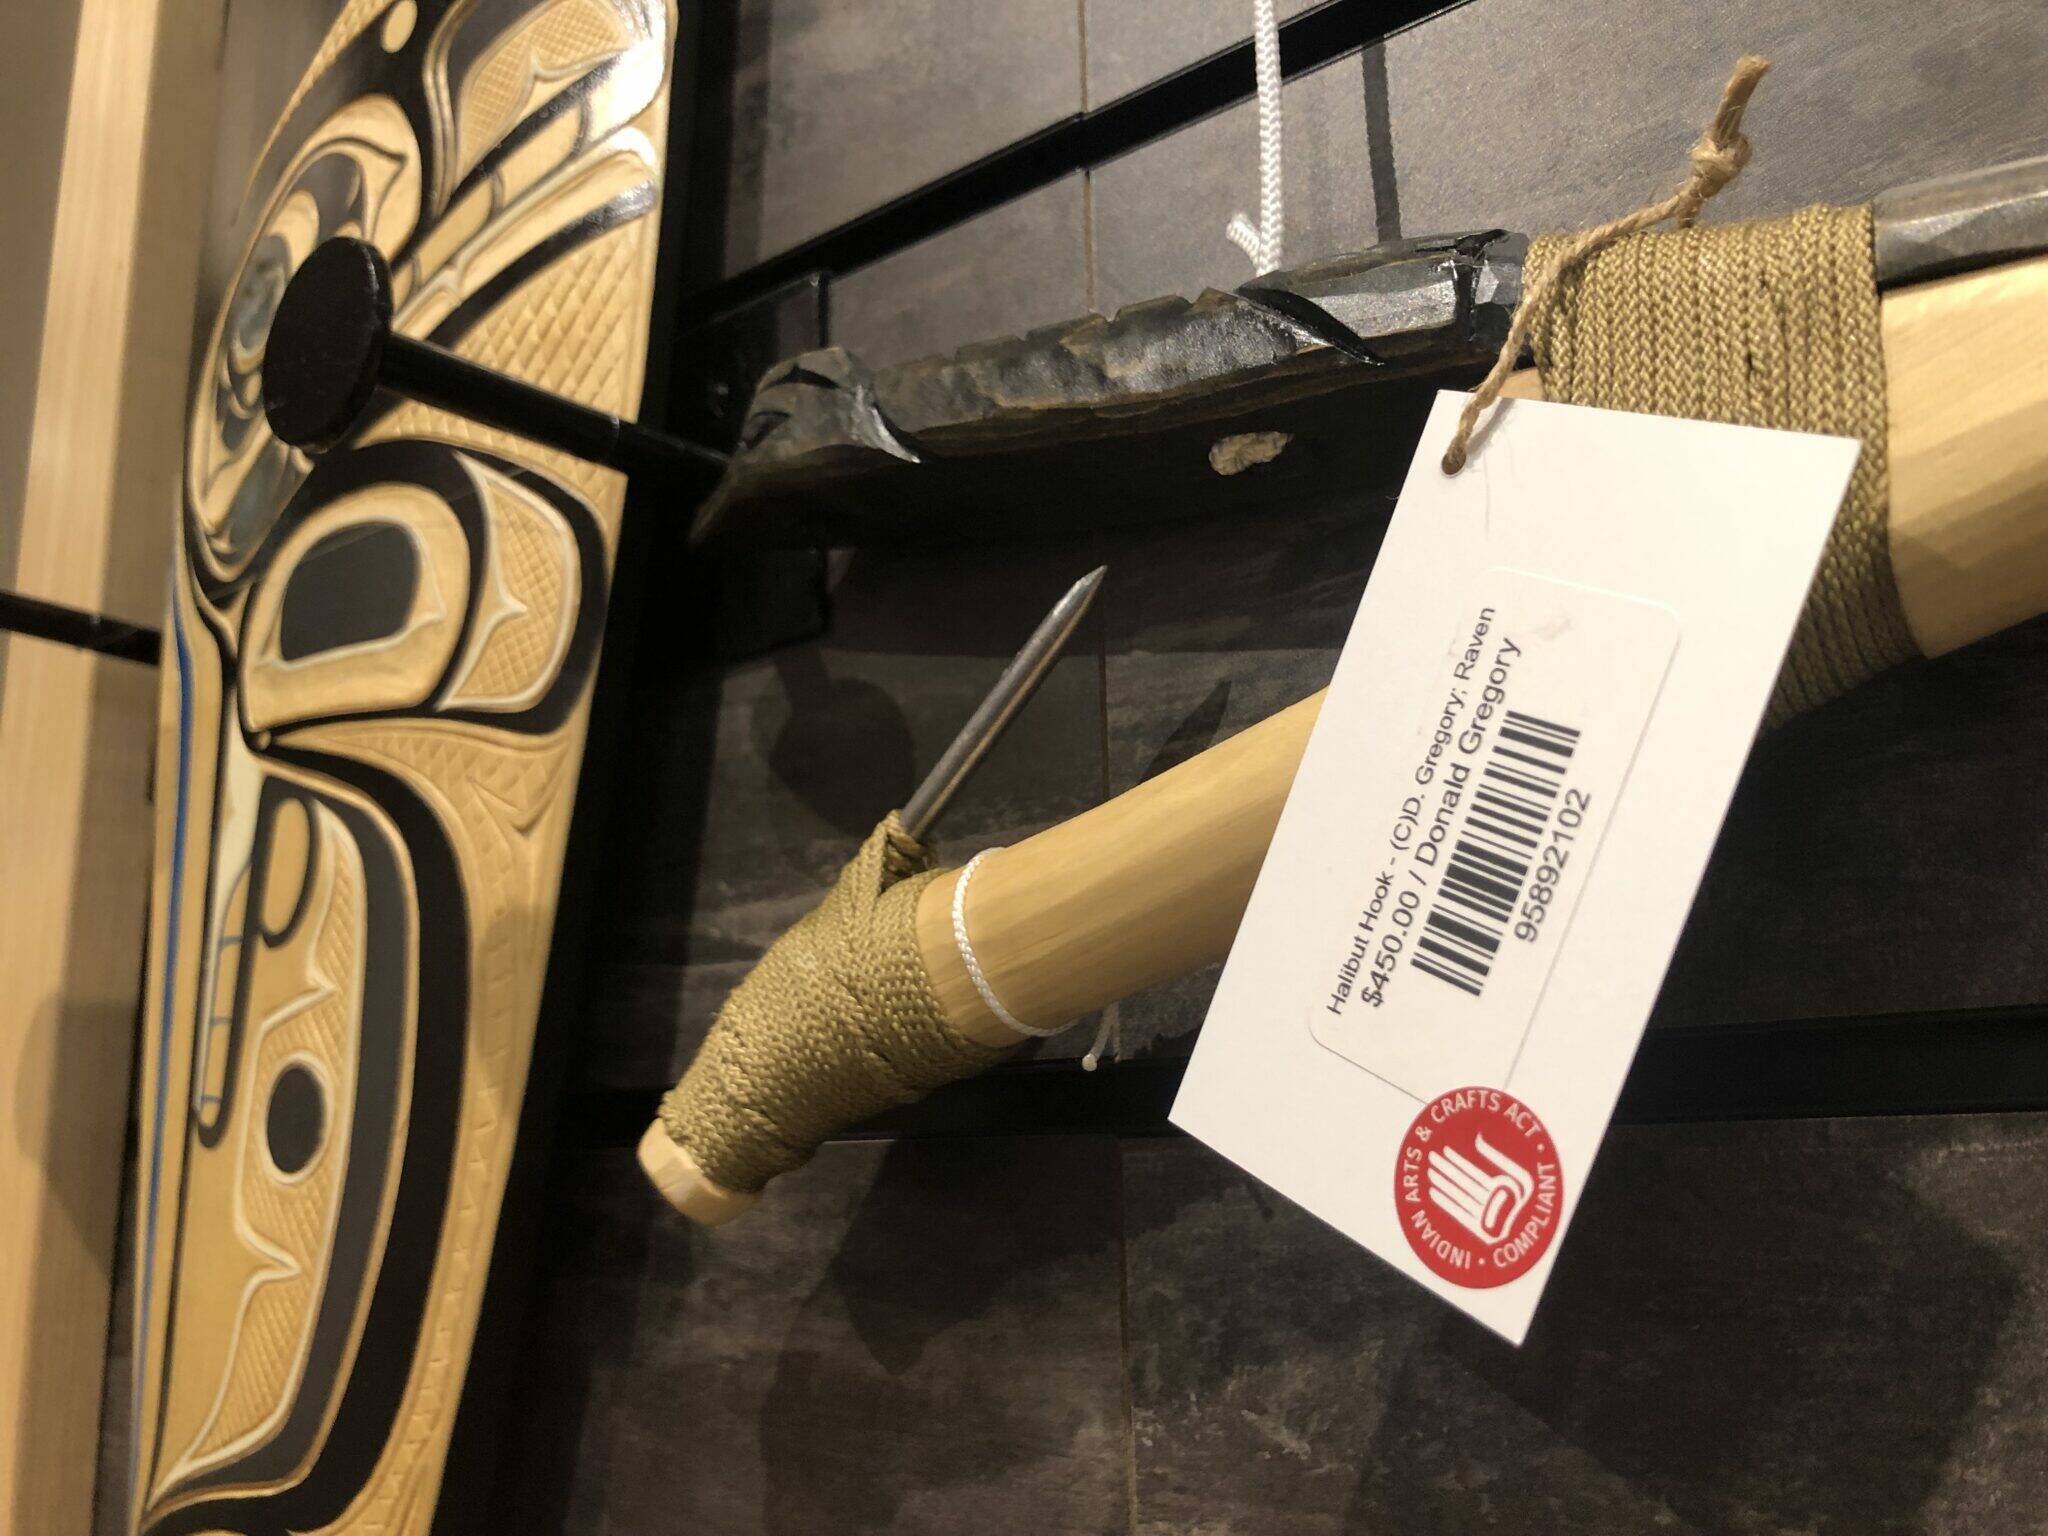 Artwork for sale at the Sealaska Heritage Institute shop on Friday bears a label declaring it compliant with the Indian Arts and Crafts Act. The federal government has filed several recent cases in Alaska for violations of the act. (Photo by James Brooks/Alaska Beacon)